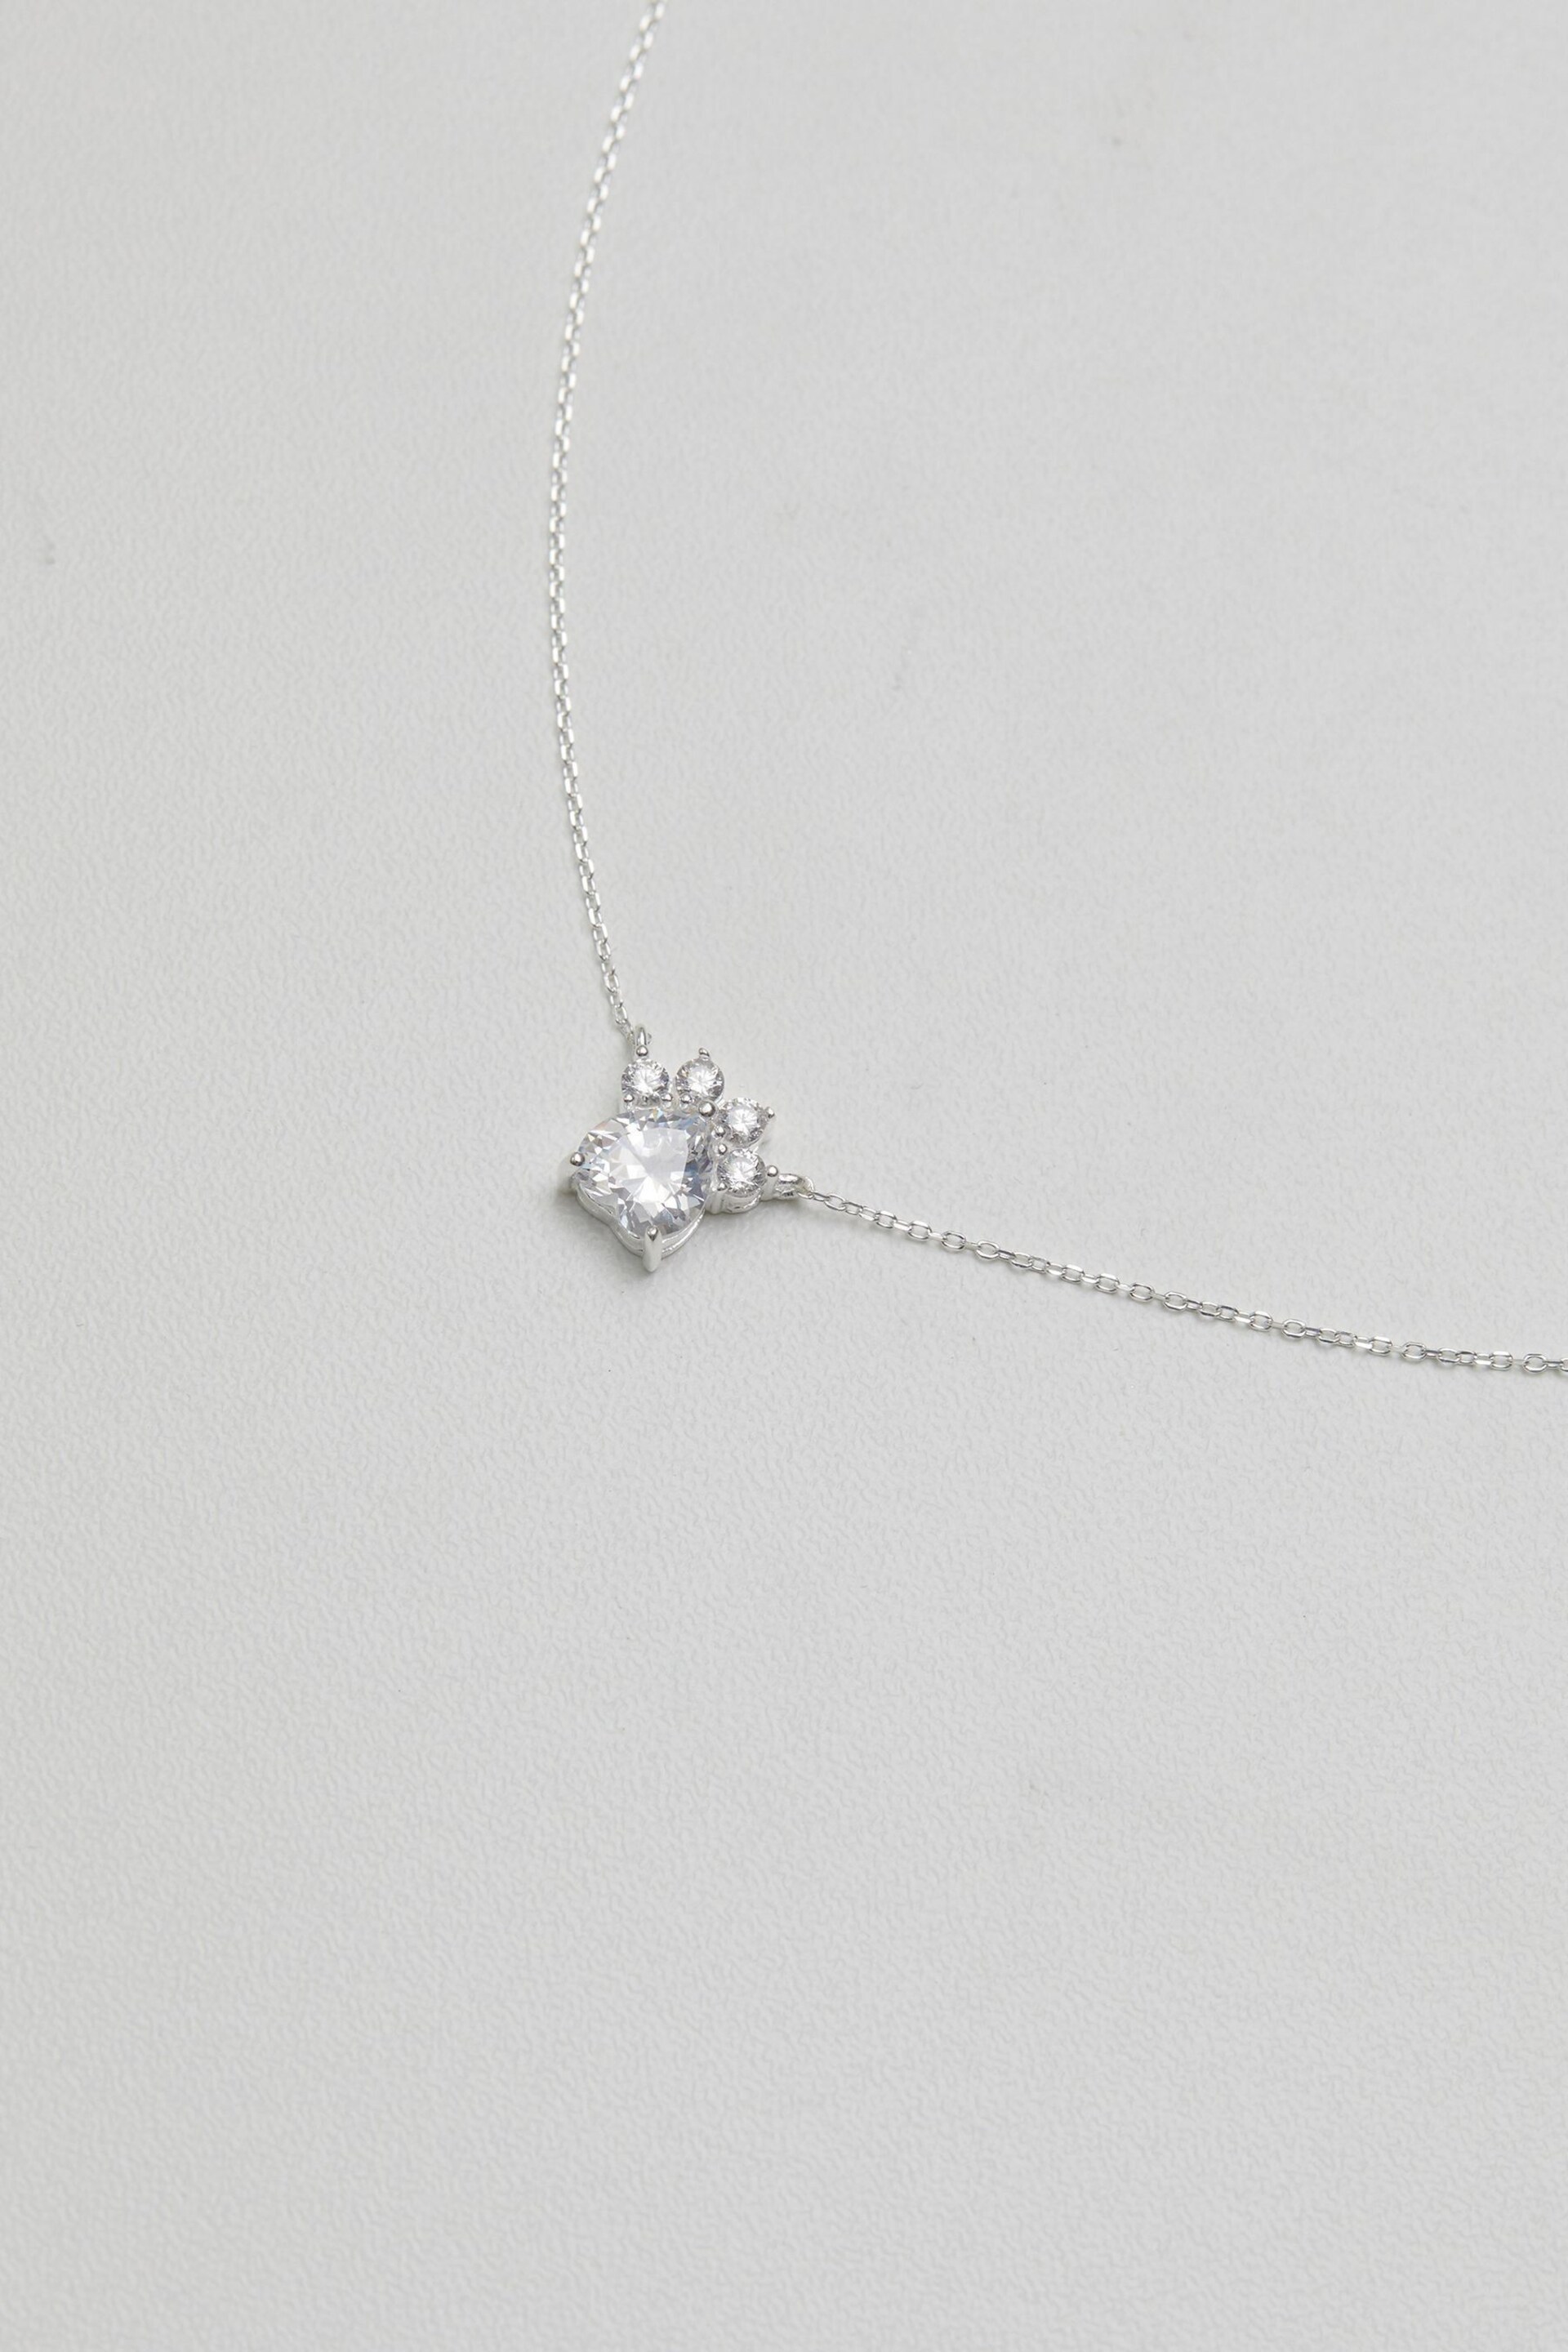 Simply Silver 925 Sterling Silver Cubic Zirconia Paw Print Pendant Necklace - Image 2 of 2